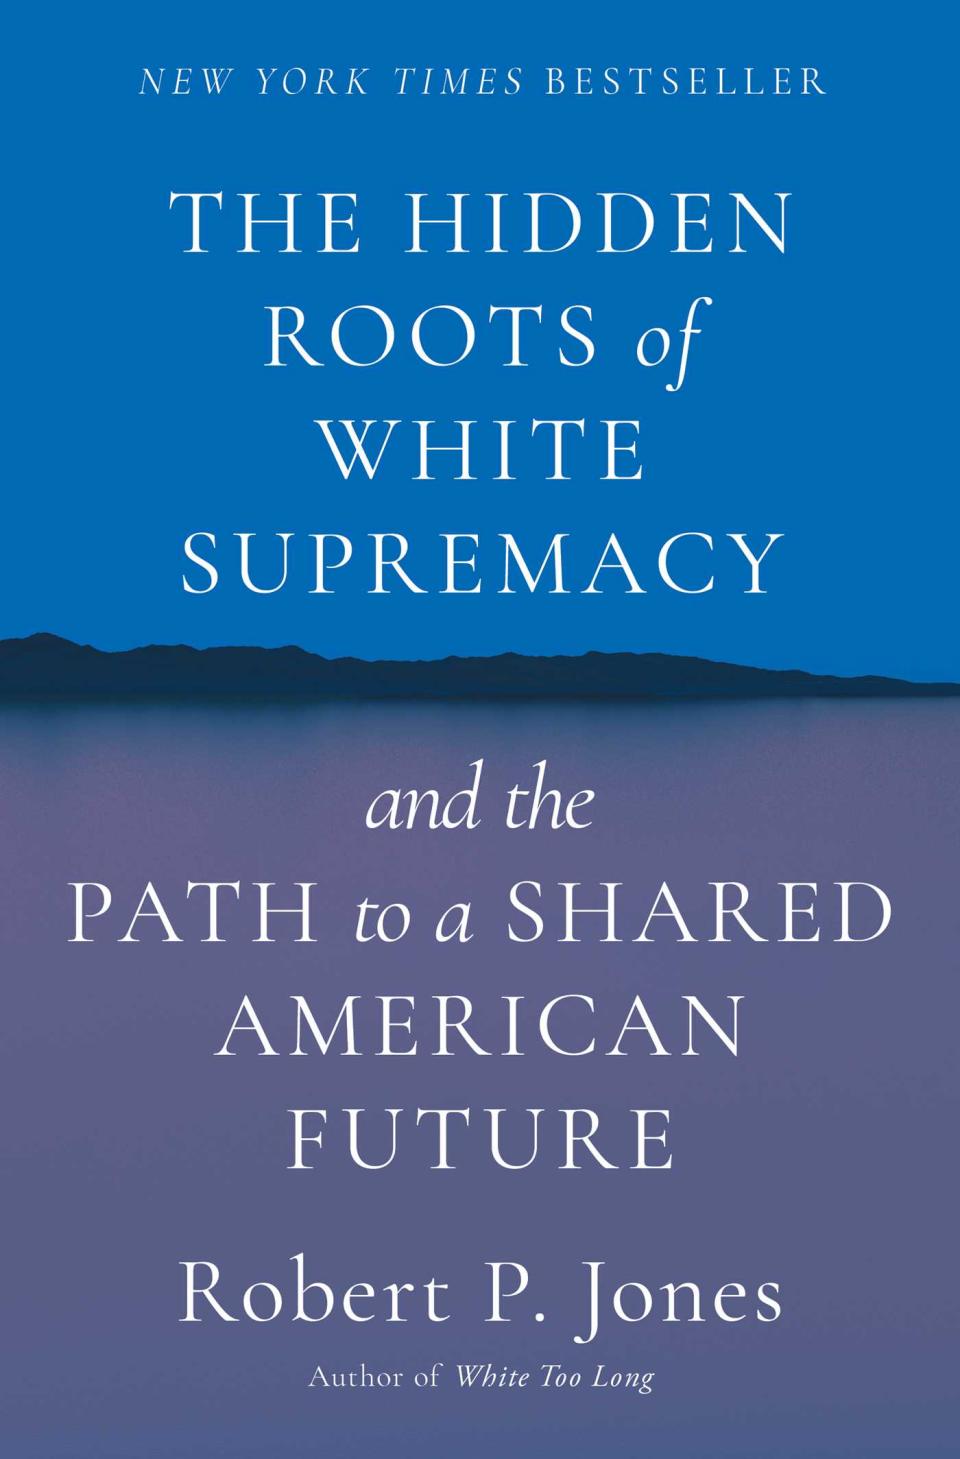 "The Hidden Roots of White Supremacy and the Path to a Shared American Future” by Robert P. Jones will be discussed in a Zoom meeting Jan. 24, organized by Racial Justice Falmouth.